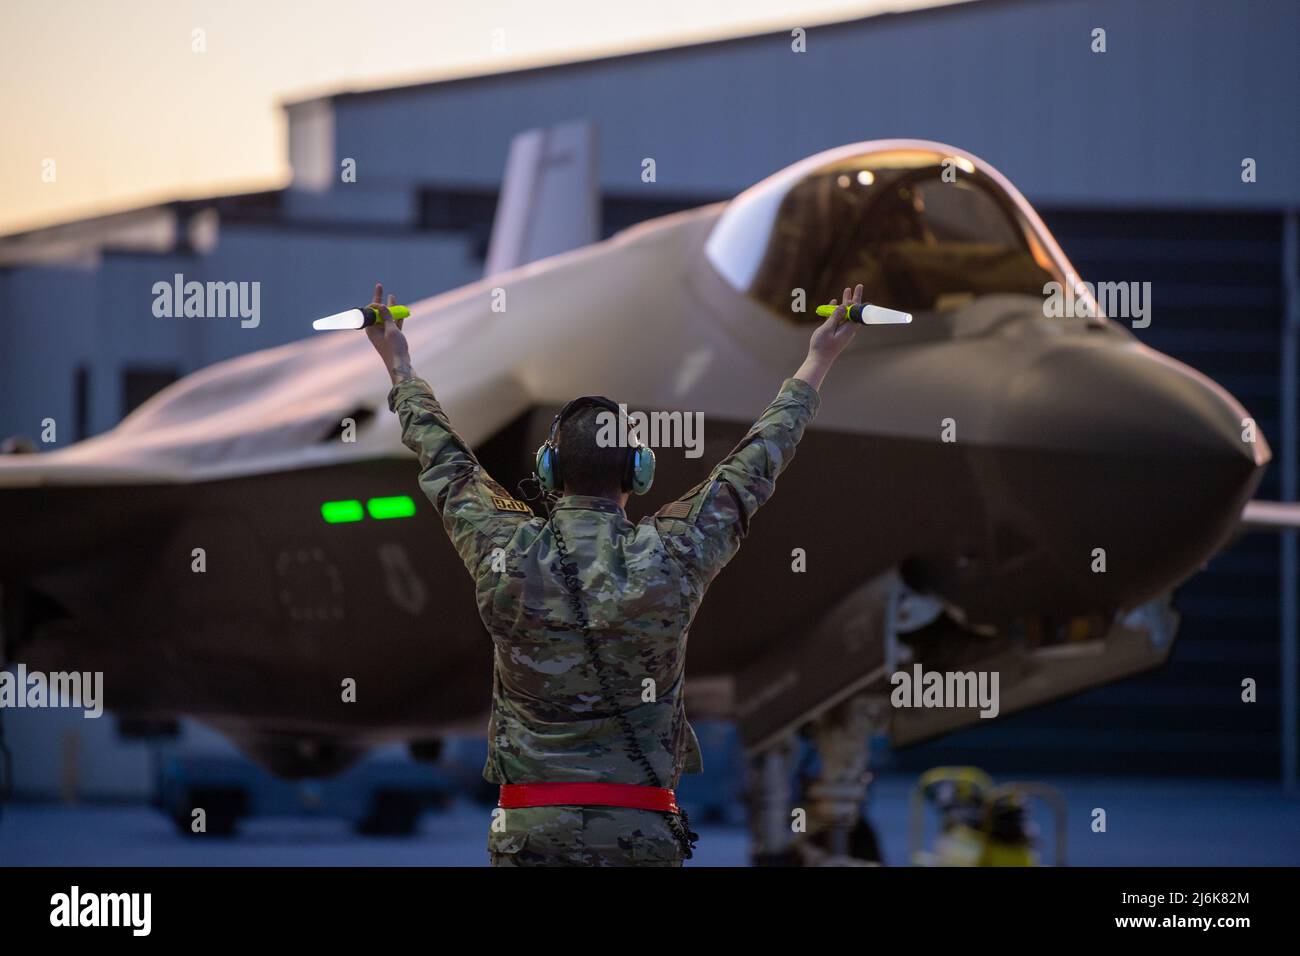 Vermont Air National Guard Base, USA. 2nd May, 2022. Credit: TSgt. Richard Mekkri/US Air Force/Alamy Live NewsBurlington, United States. 02 May, 2022. A U.S. Air Force crew chief assigned to the 158th Fighter Wing, signals a F-35A Lightning II fighter aircraft to taxi as it prepares to depart the Vermont Air National Guard Base, May 2, 2022 in South Burlington, Vermont. The aircraft is rebasing to Spangdahlem Air Base, Germany, to join the NATO Enhanced Air Policing mission. Credit: Planetpix/Alamy Live News Stock Photo